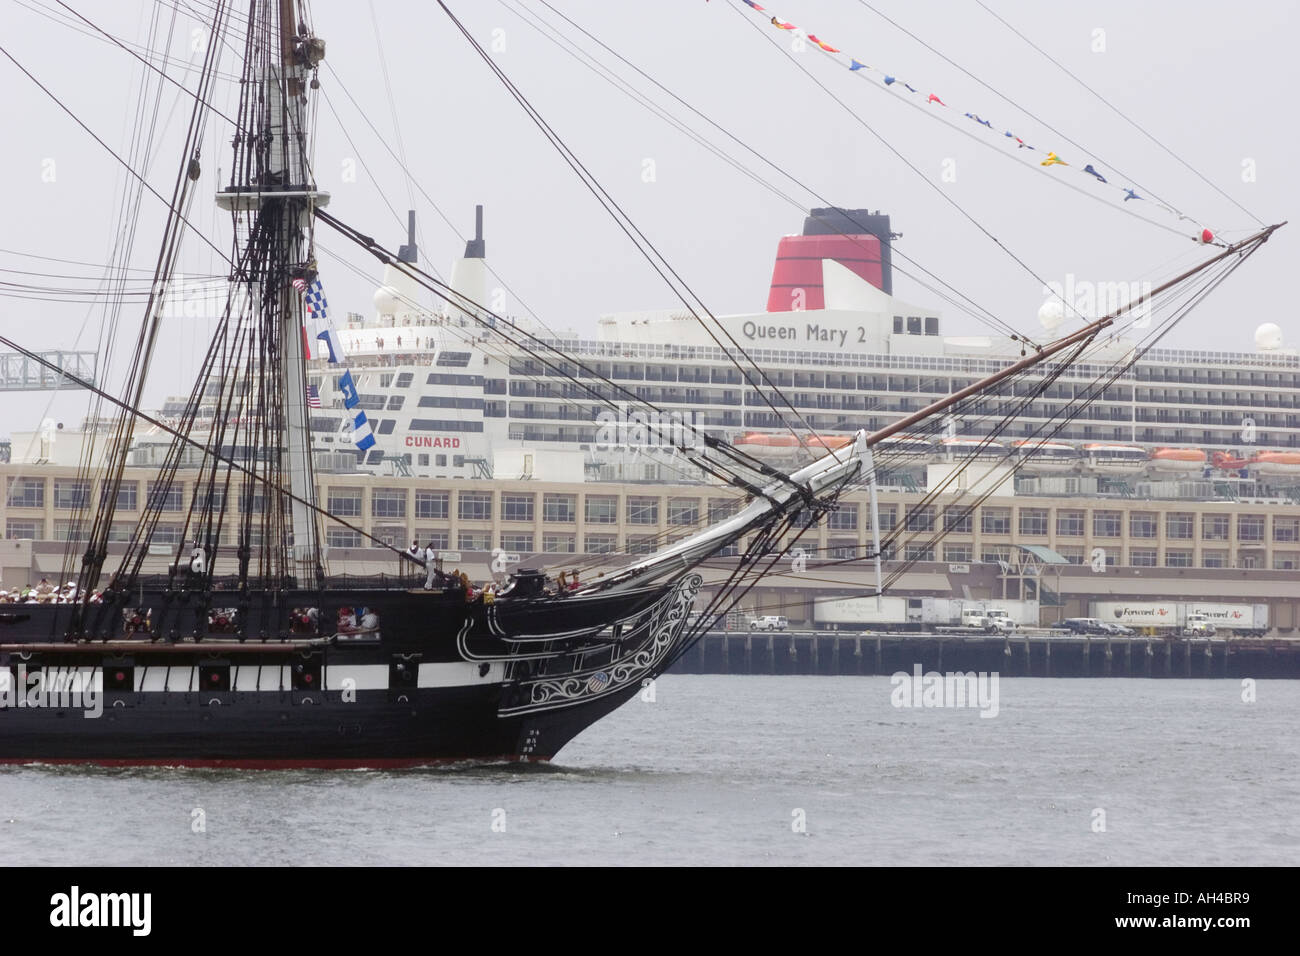 USS Constitution sails past the Queen Mary 2 on annual turn around cruise July 4 2006 Stock Photo